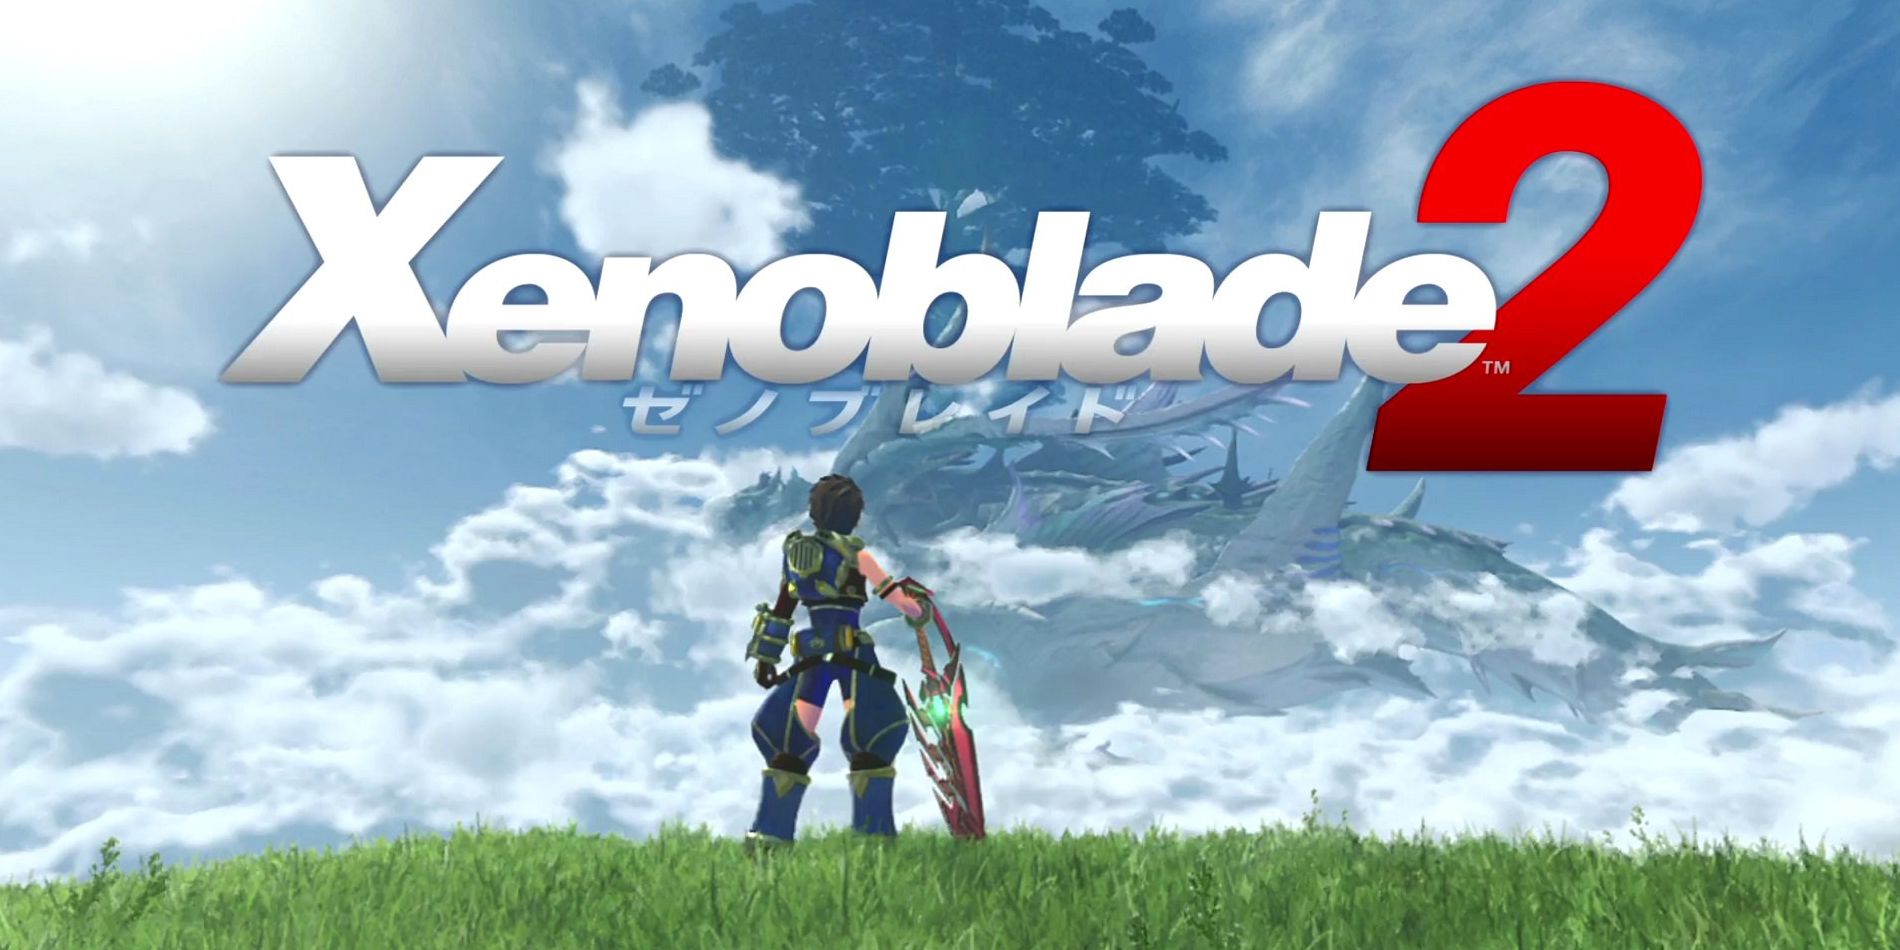 The title card for Xenoblade Chronicles 2